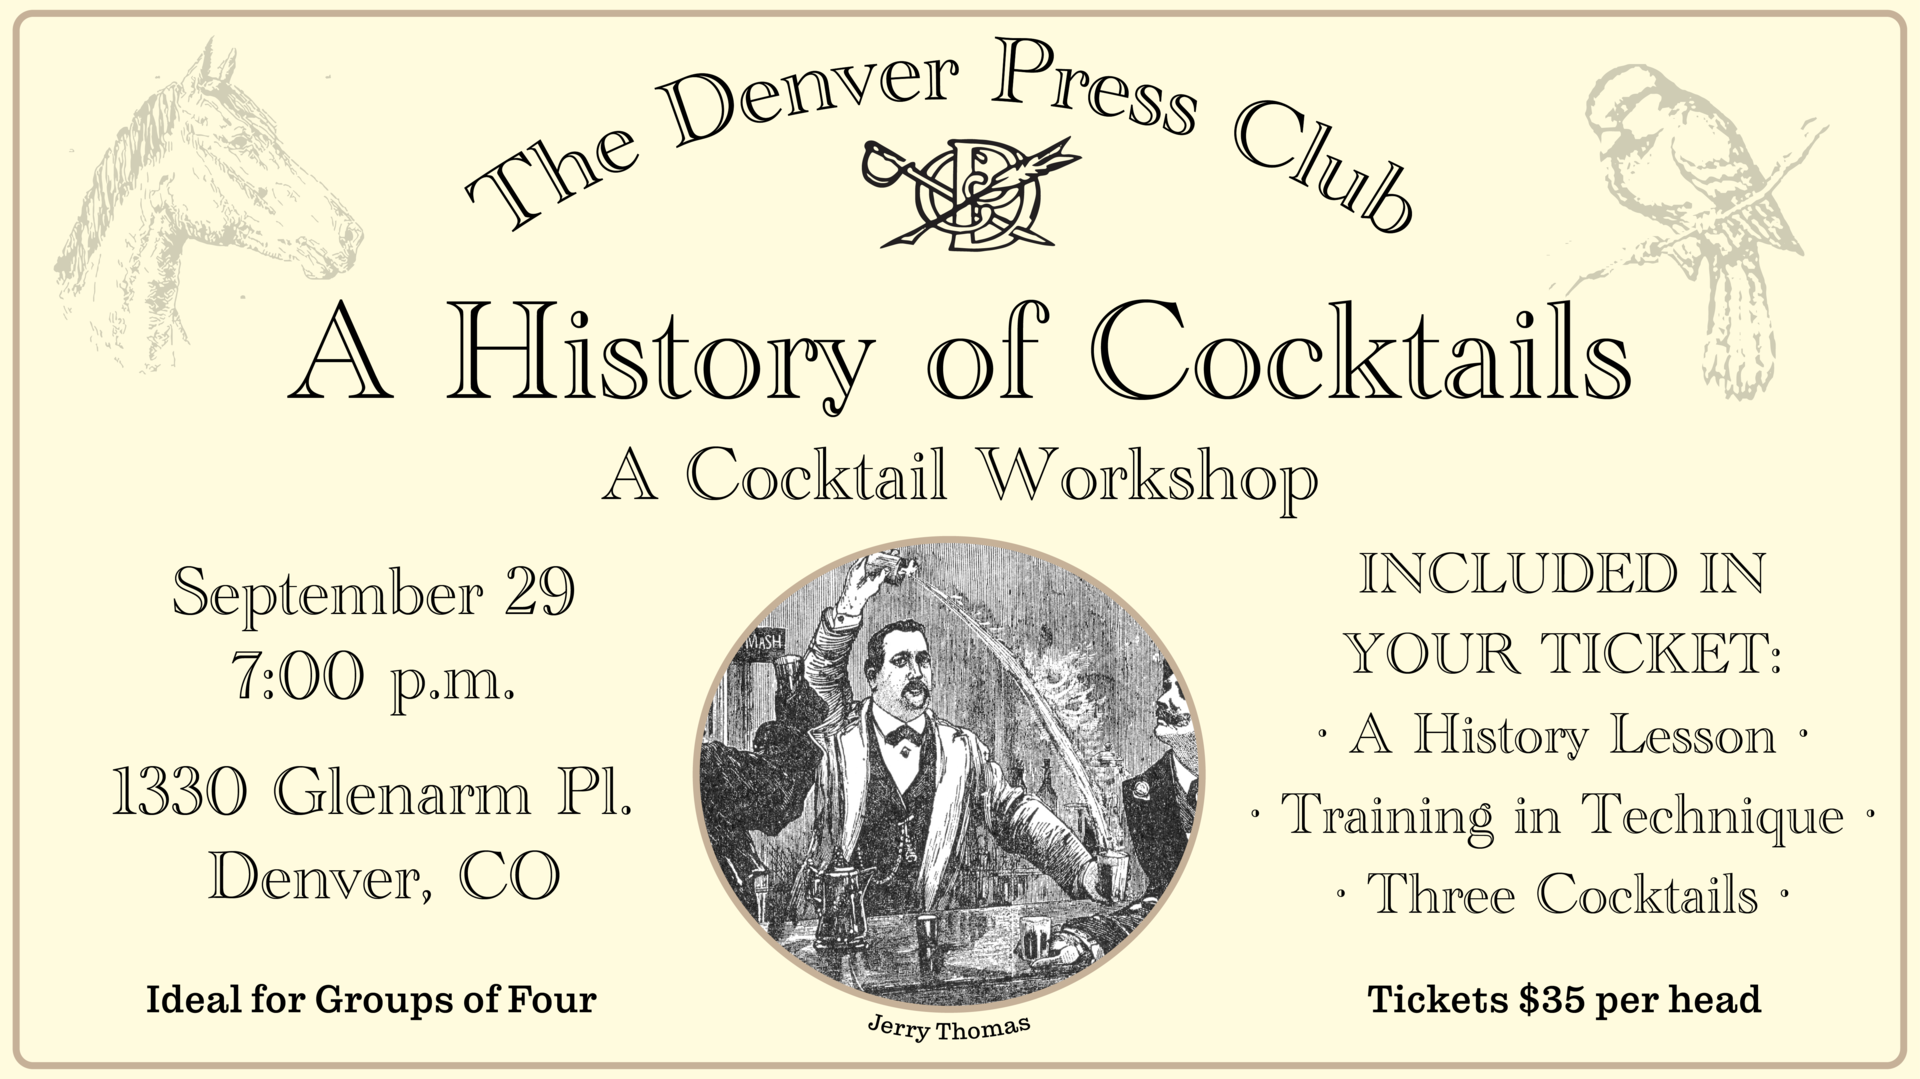  The Denver Press Club presents a History of Cocktails